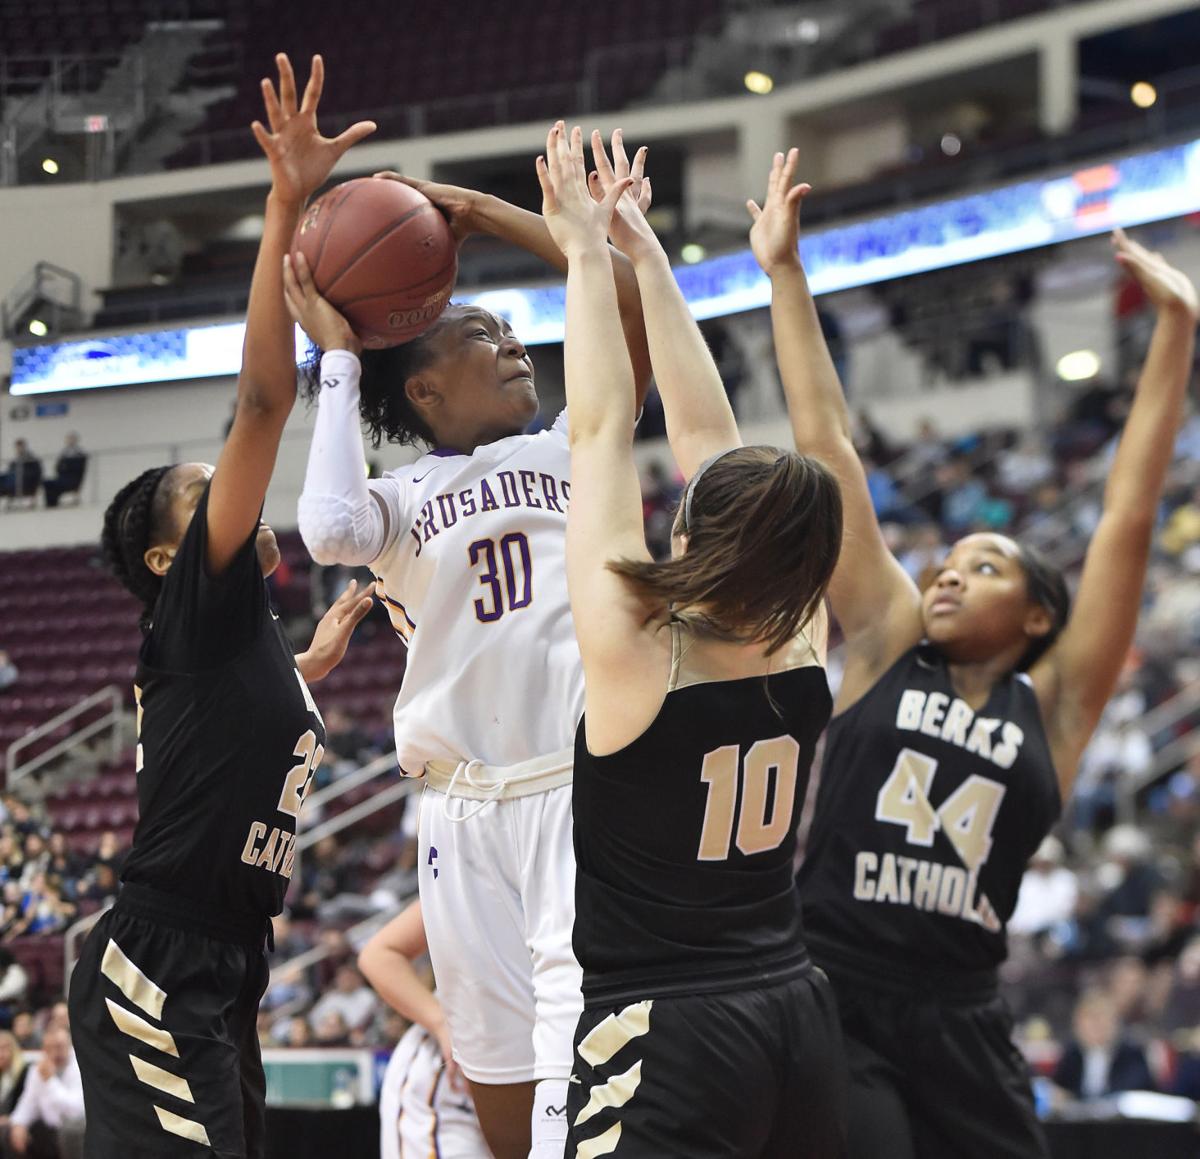 PIAA releases matchups, sites, times for first round of girls